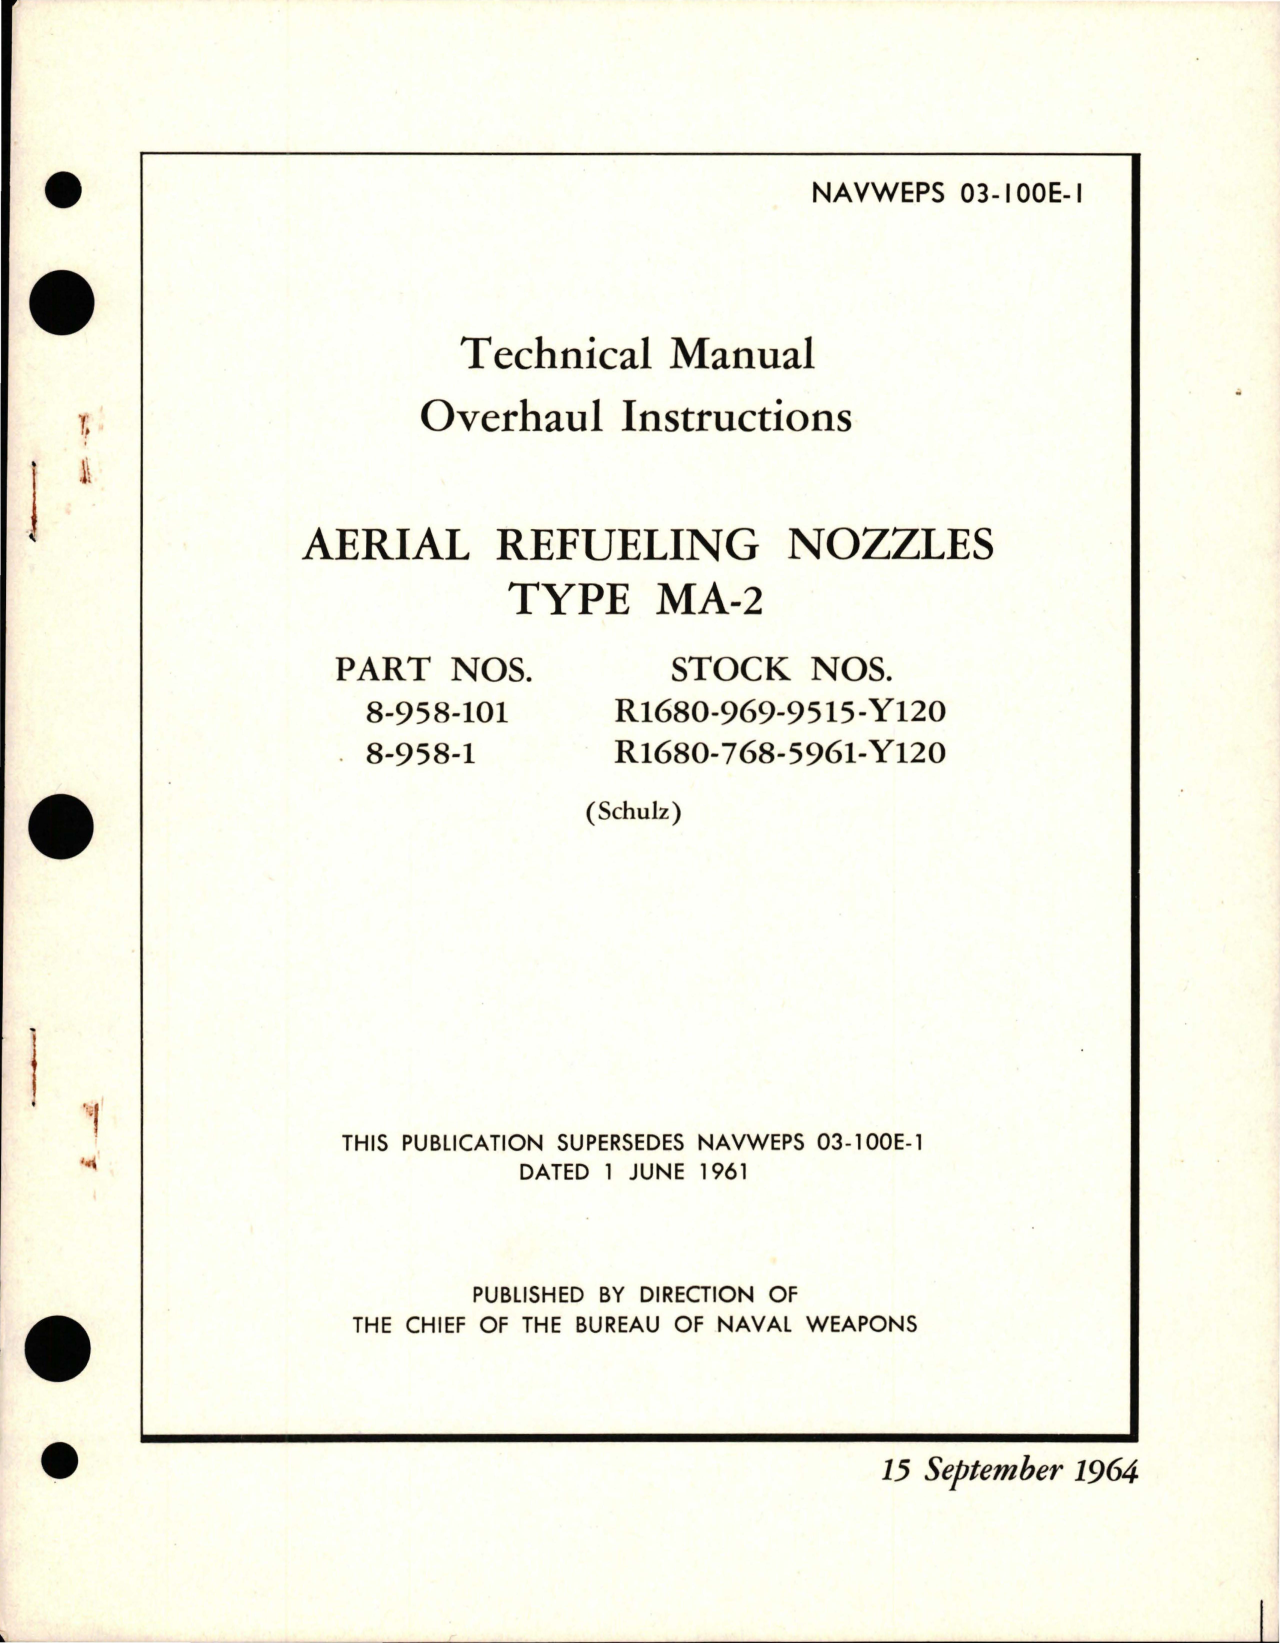 Sample page 1 from AirCorps Library document: Overhaul Instructions for Aerial Refueling Nozzles - Type MA-2 - Part 8-958-101 and 8-958-1 